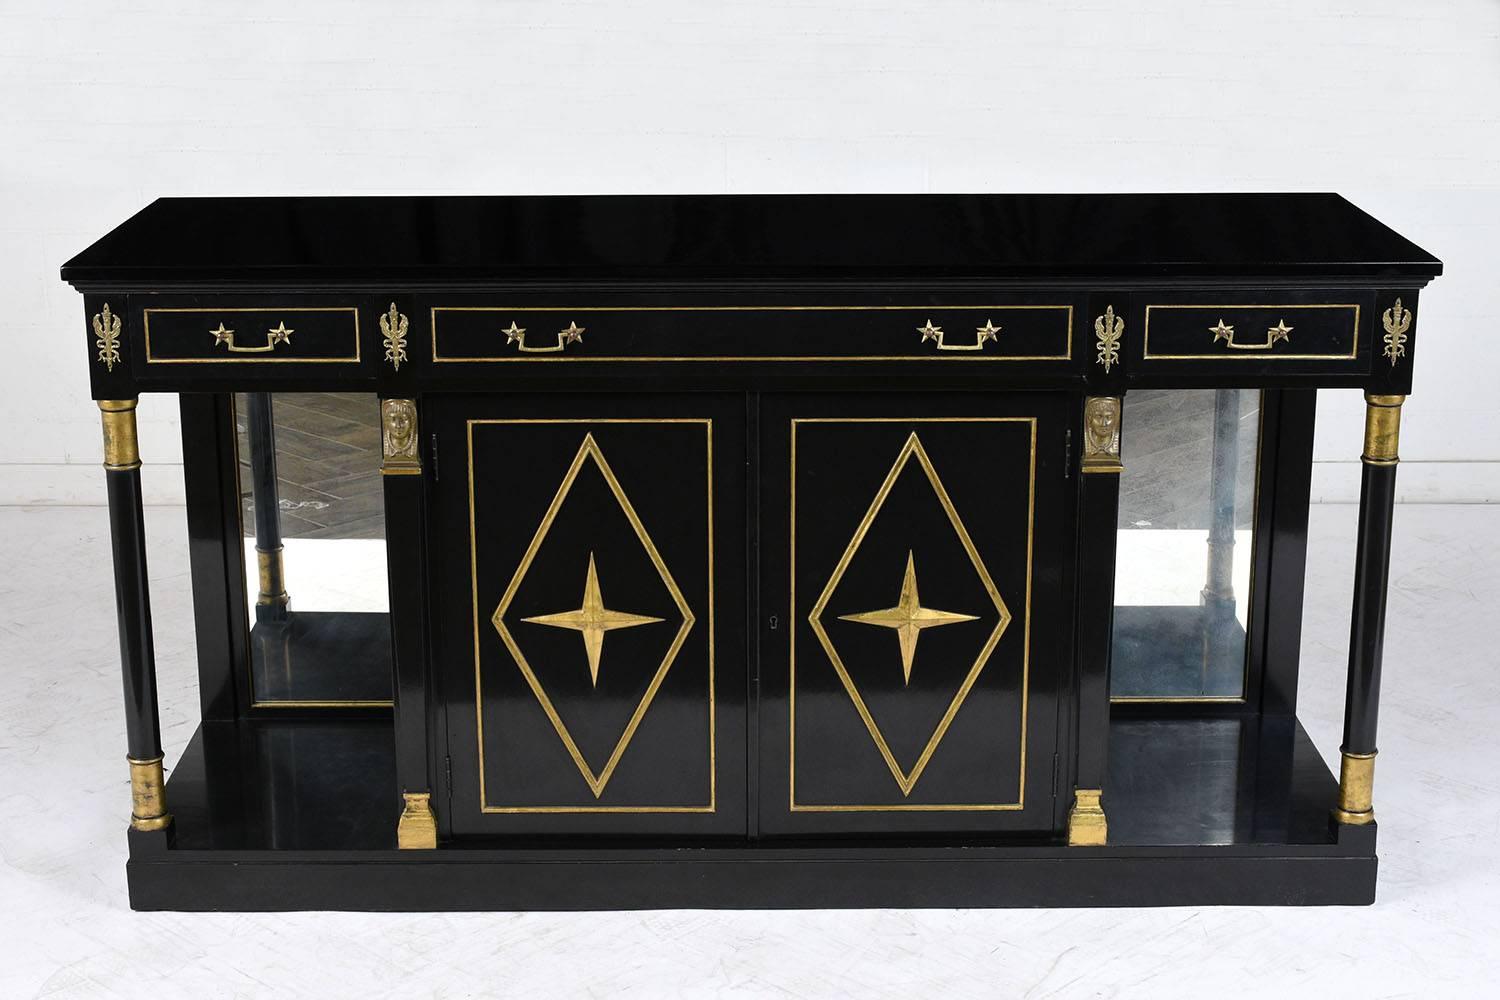 This 1950s Empire-style server or buffet is made of wood that has been ebonized with giltwood accents a lacquered finish. There are three drawers along the top with brass moulding details and decorative brass drawer pulls. In the centre below there